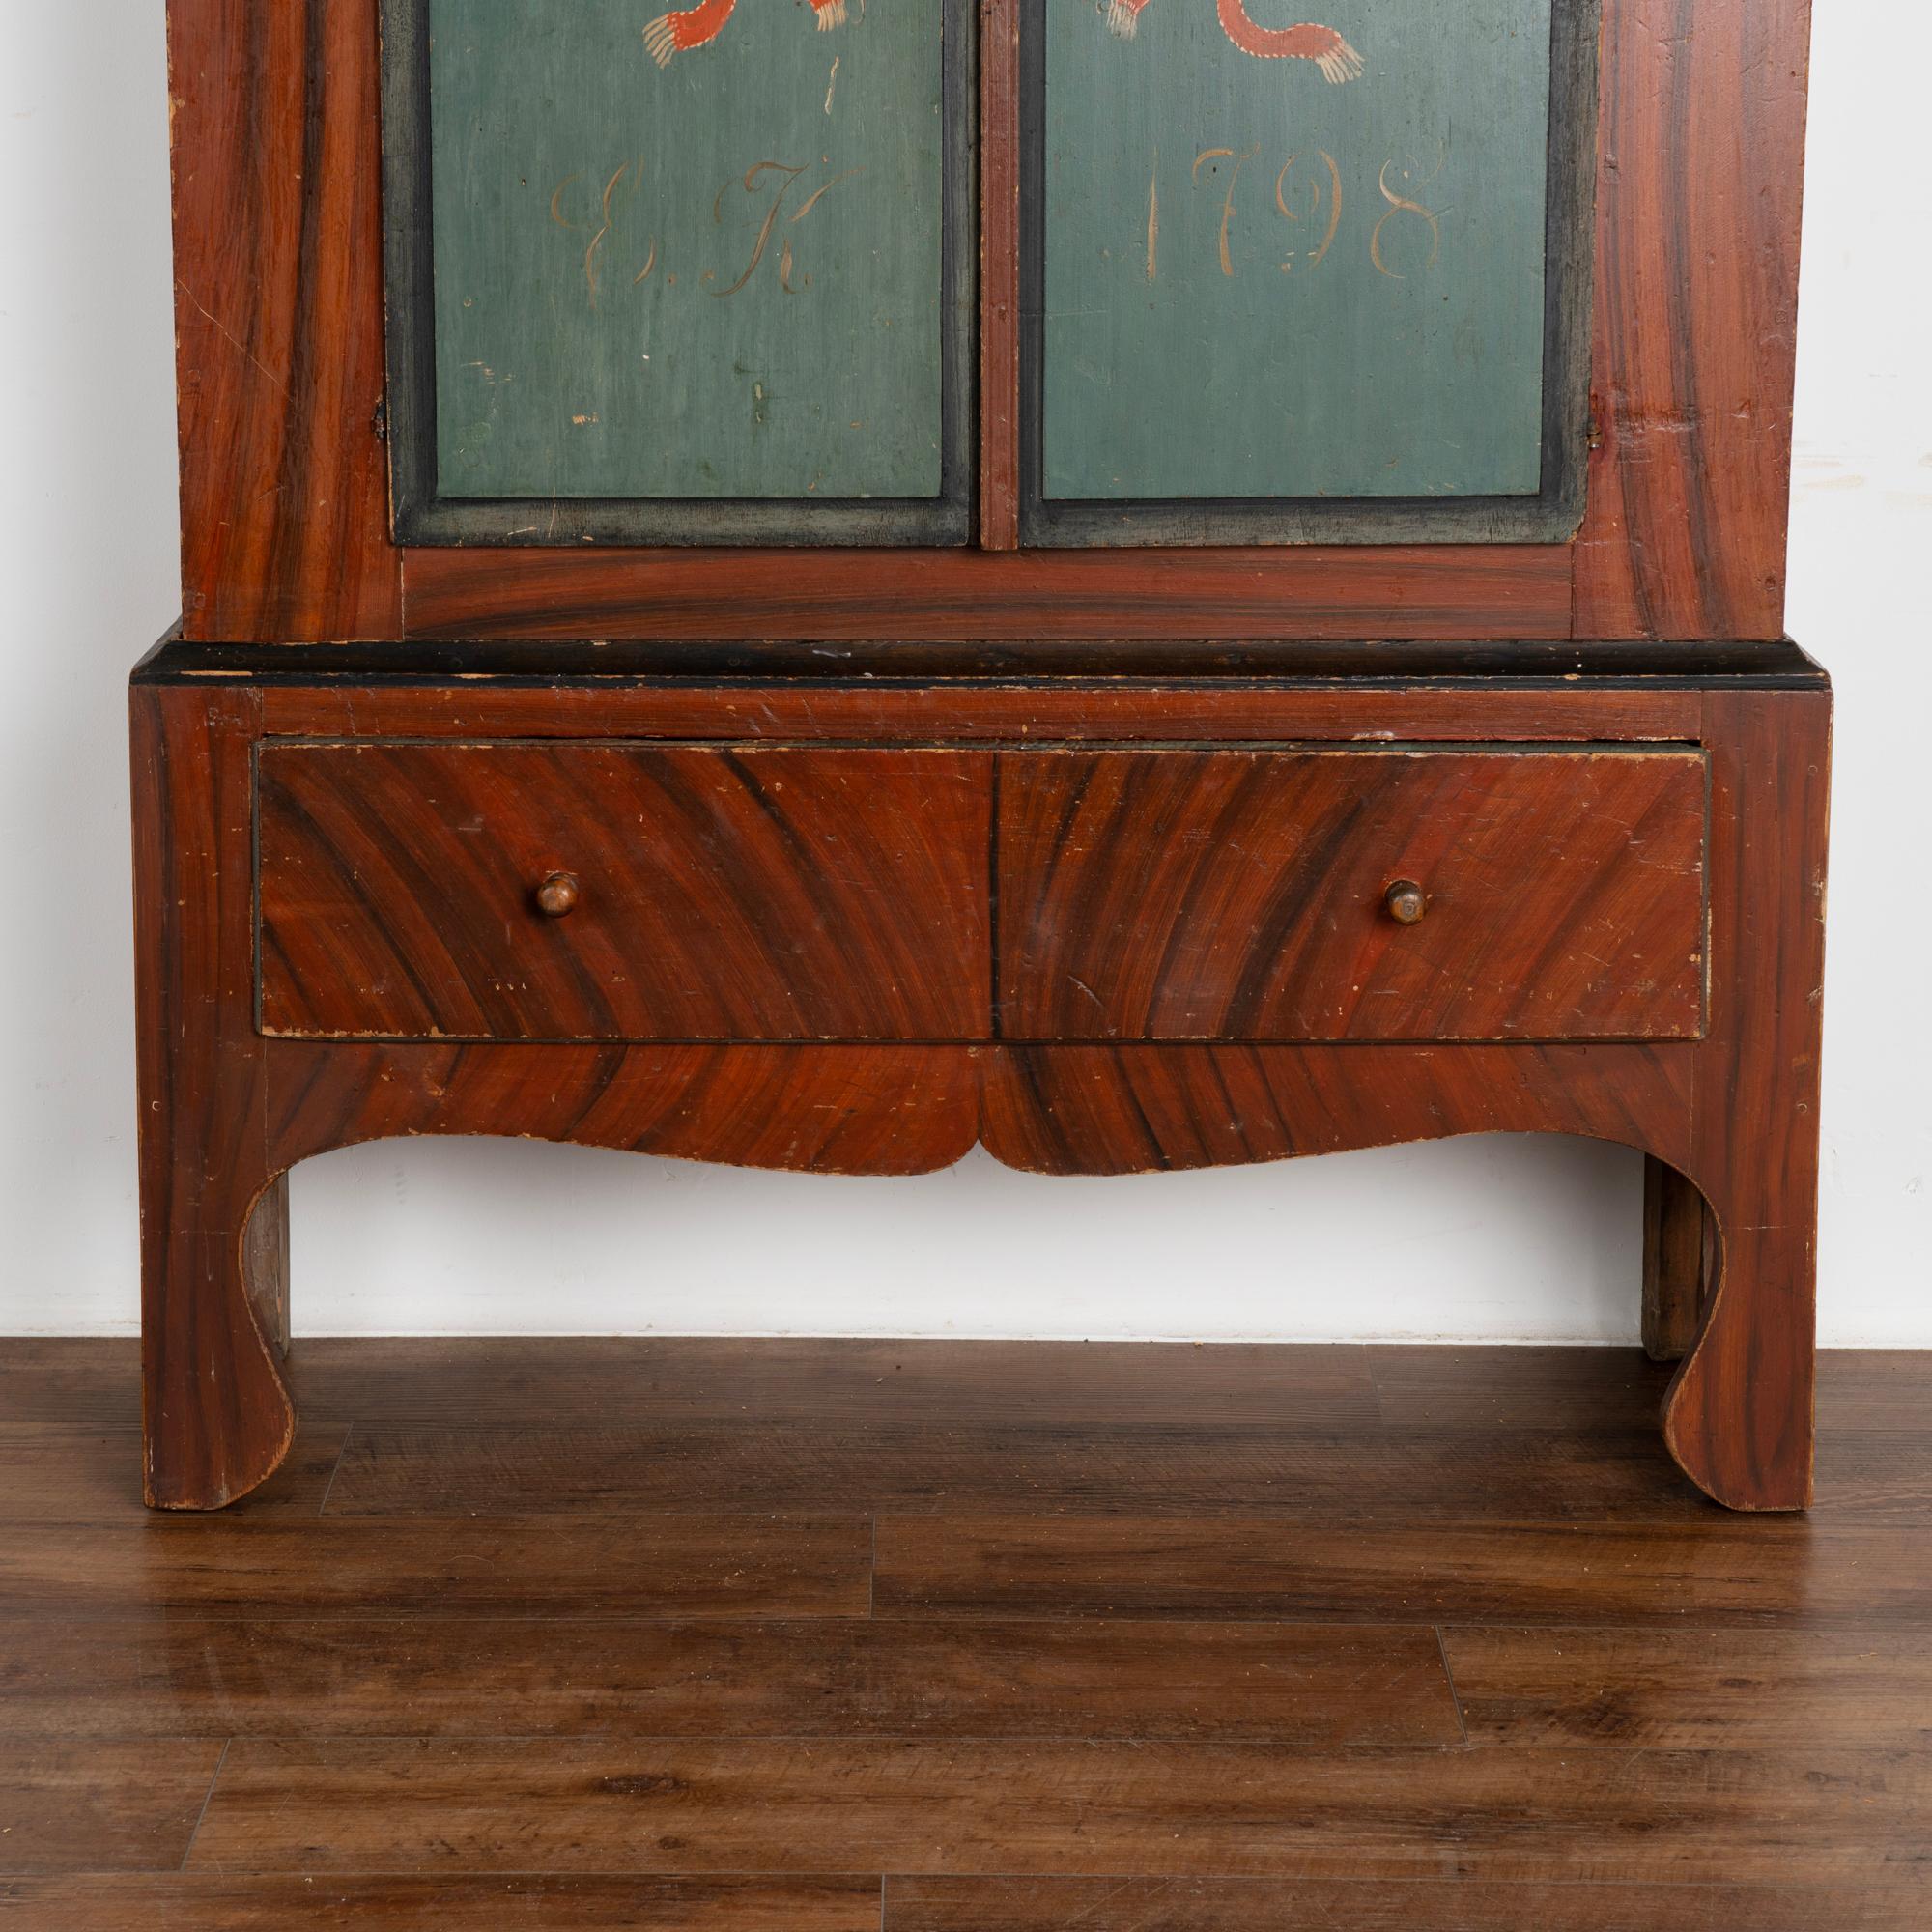 Original Hand Painted Swedish Cabinet dated 1798 For Sale 4